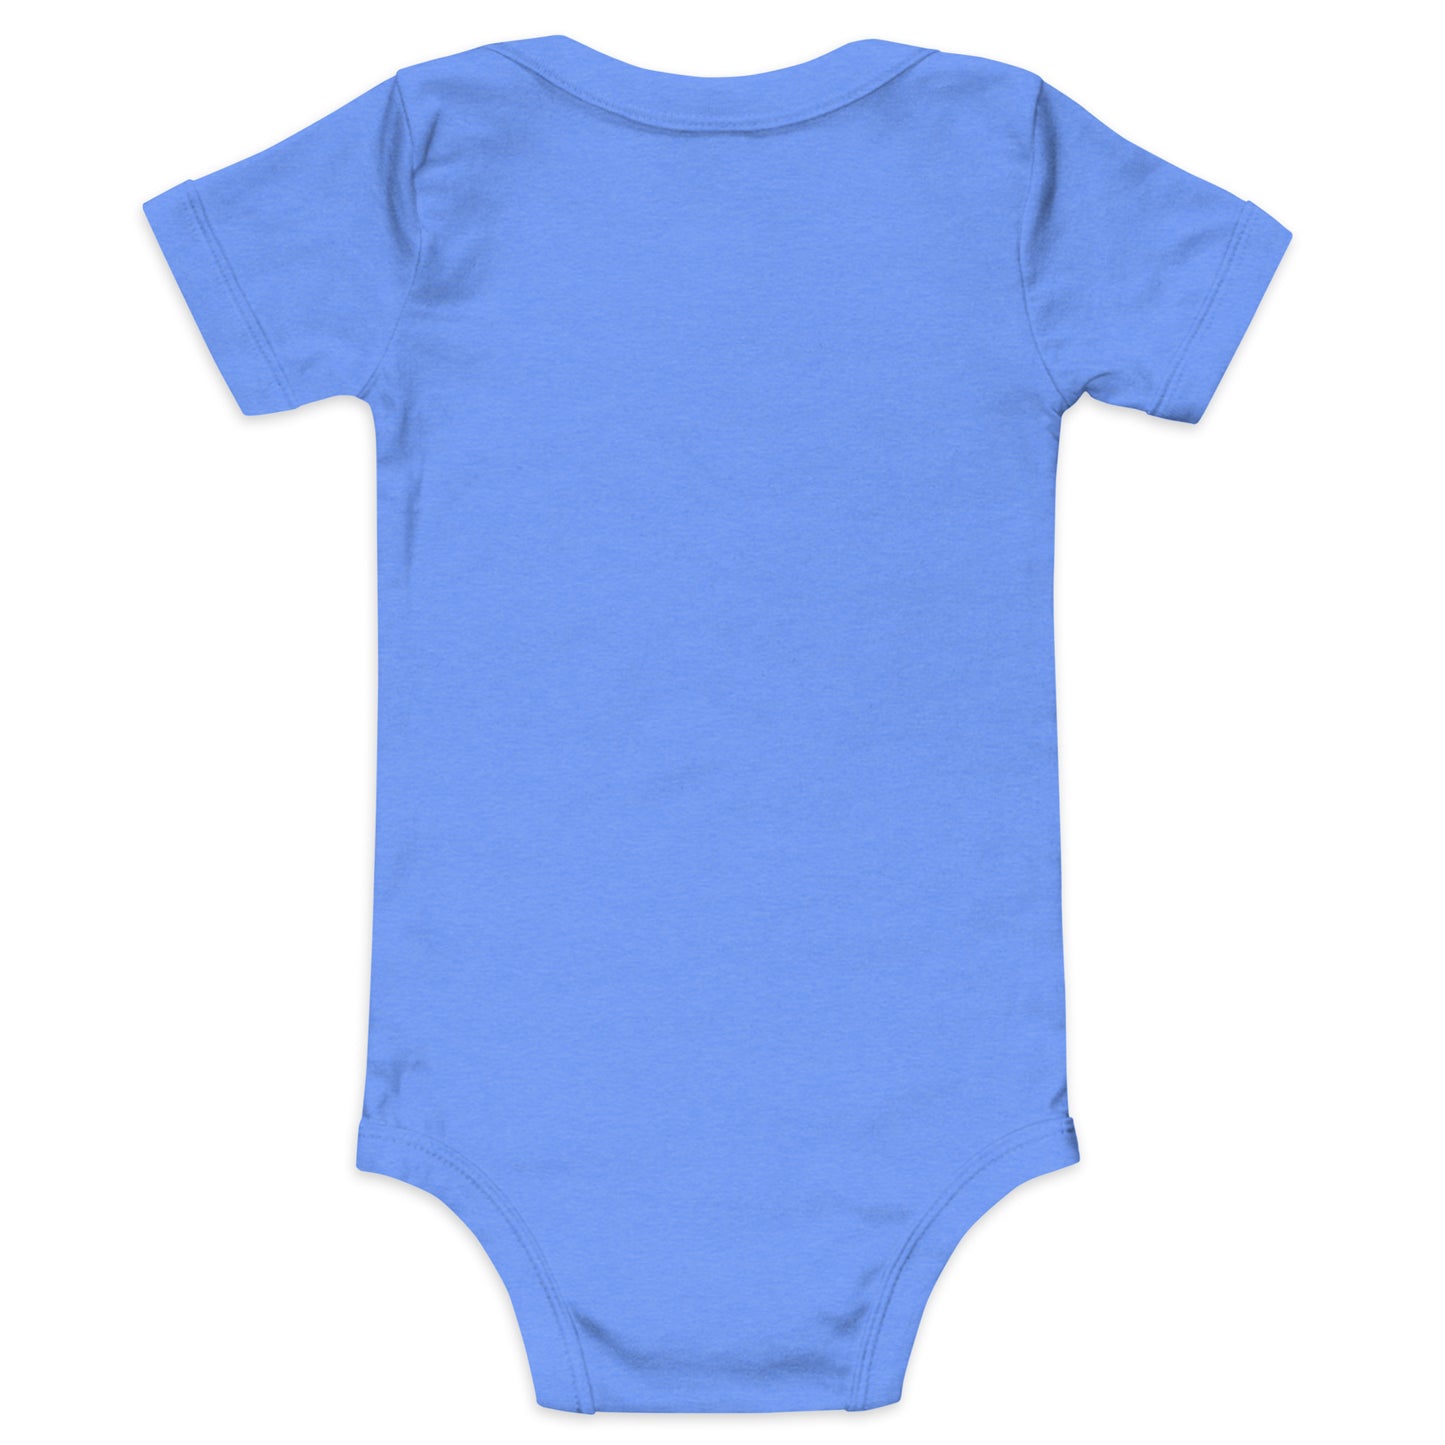 BORN TO BE A GOON | BABY BODYSUIT